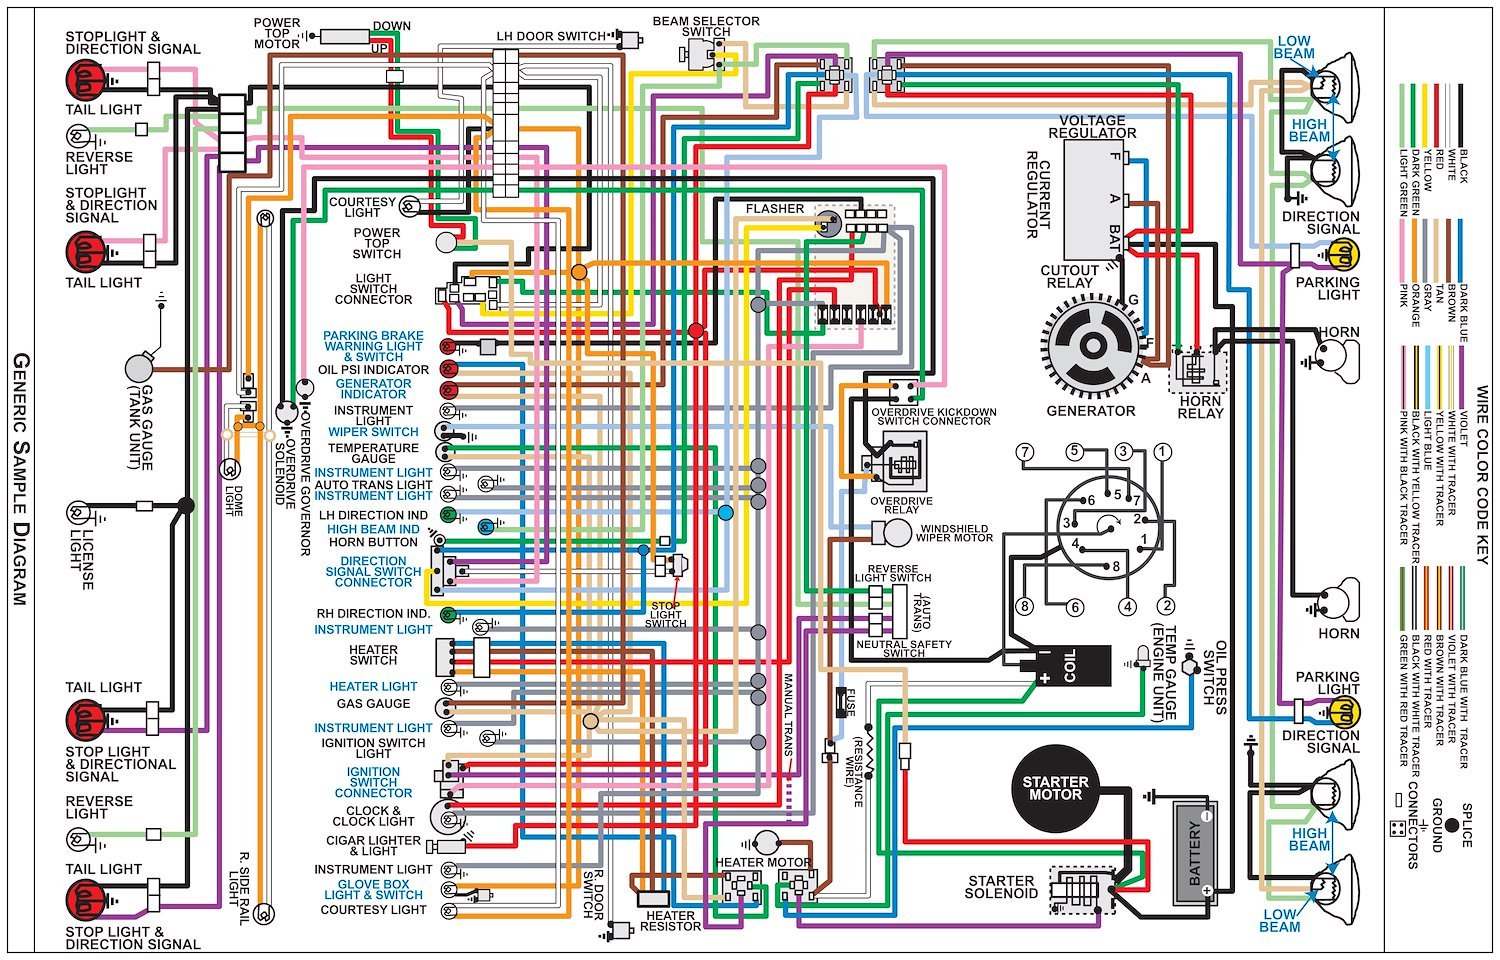 Wiring Diagram for 1966 Dodge Charger with HEMI Engine, 11 in x 17 in., Laminated